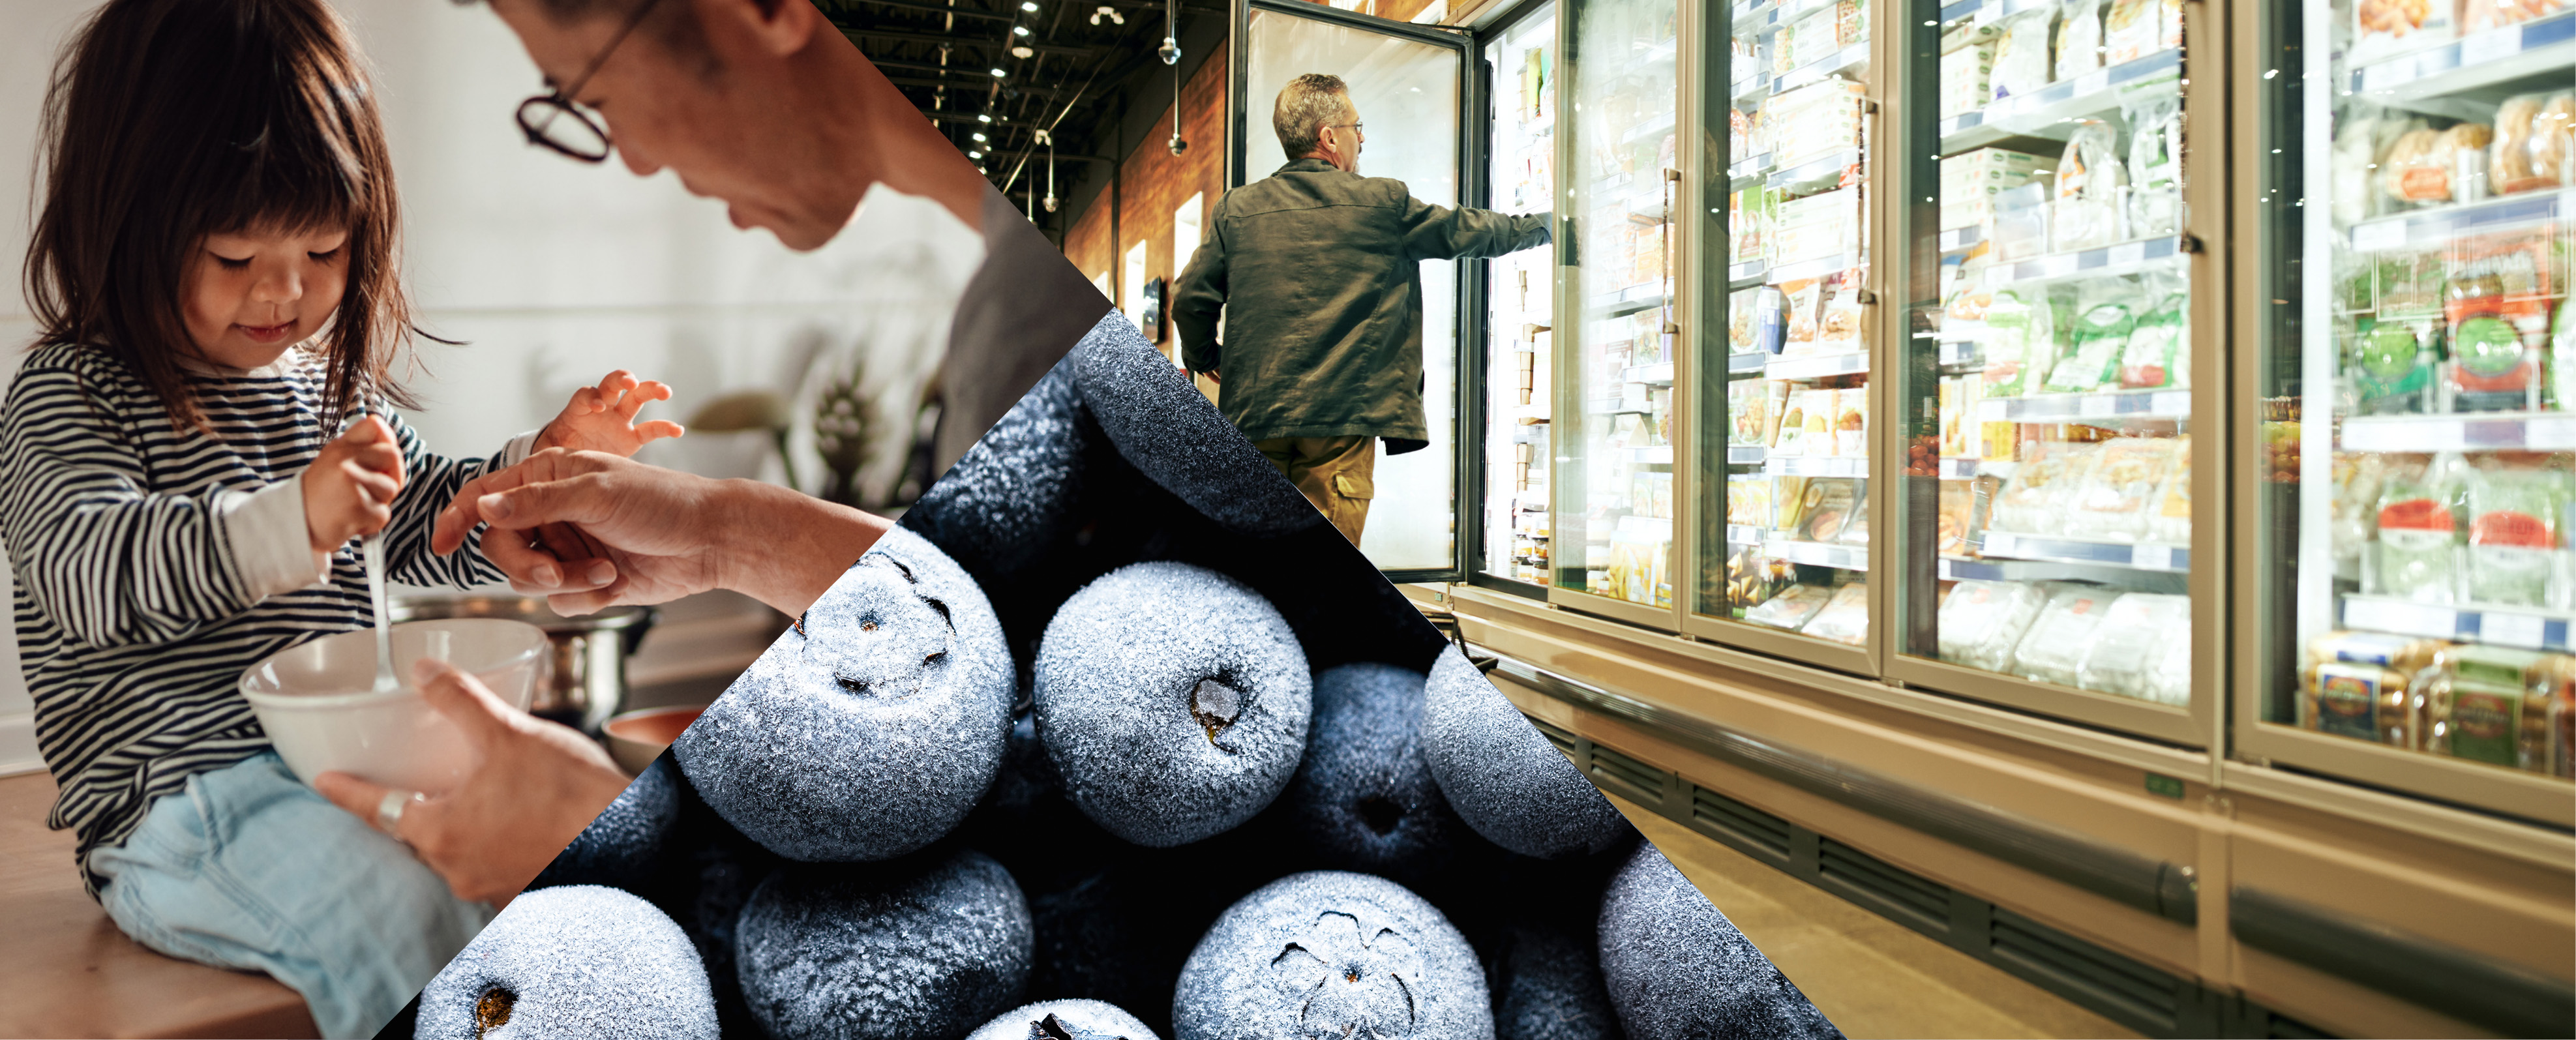 Collage of child and father sharing food, blueberries and the frozen aisle of a grocery store